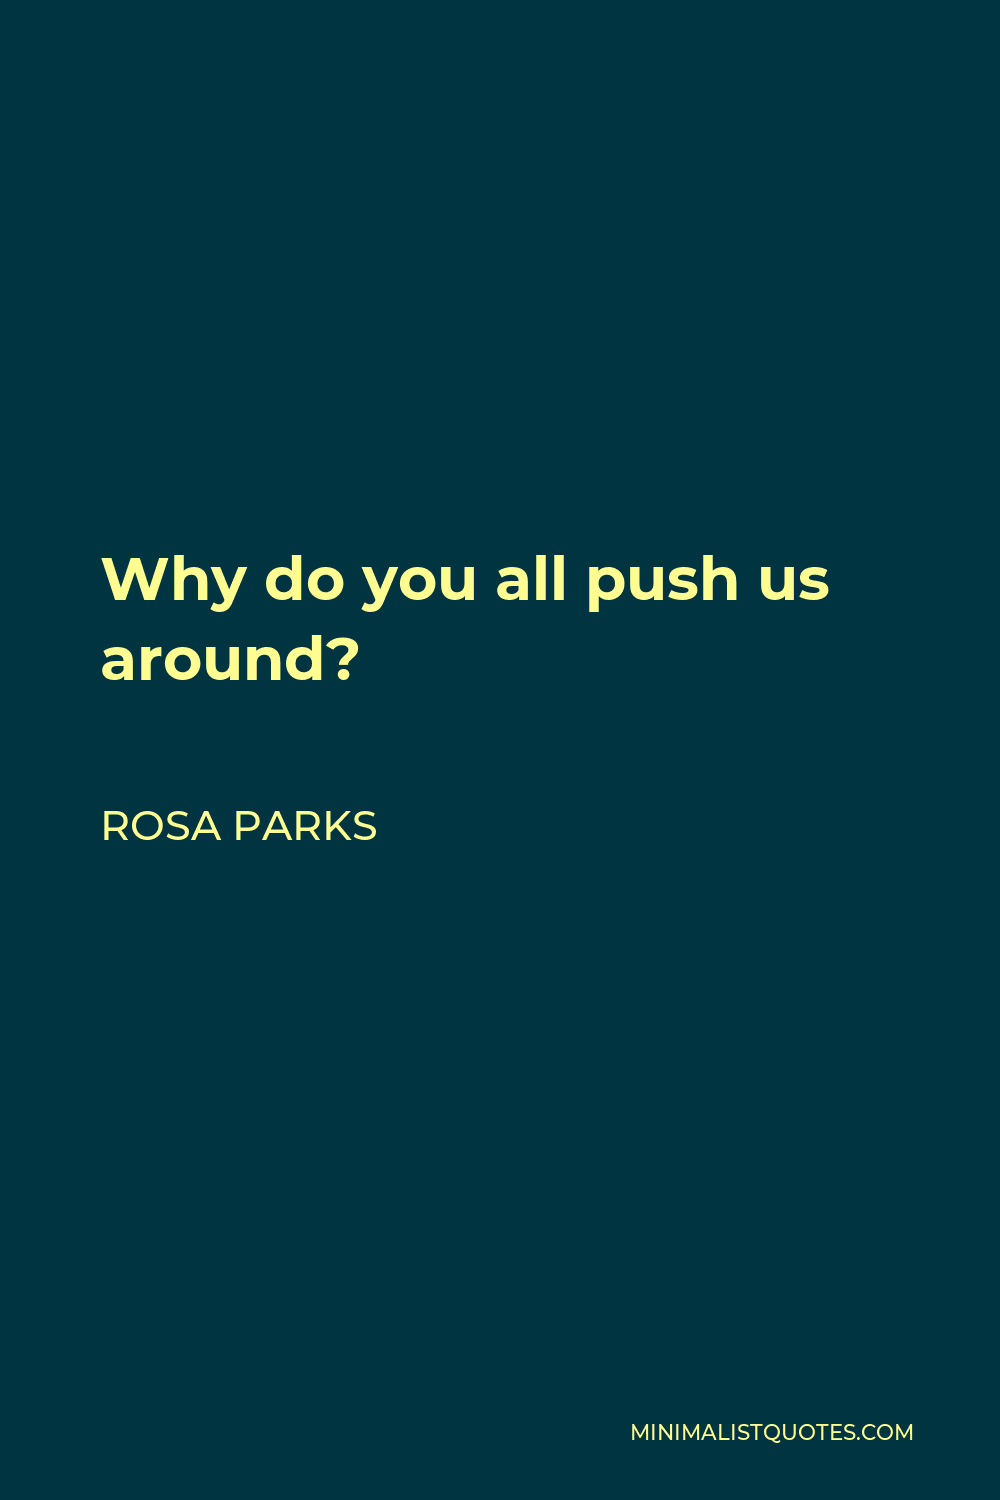 Rosa Parks Quote - Why do you all push us around?